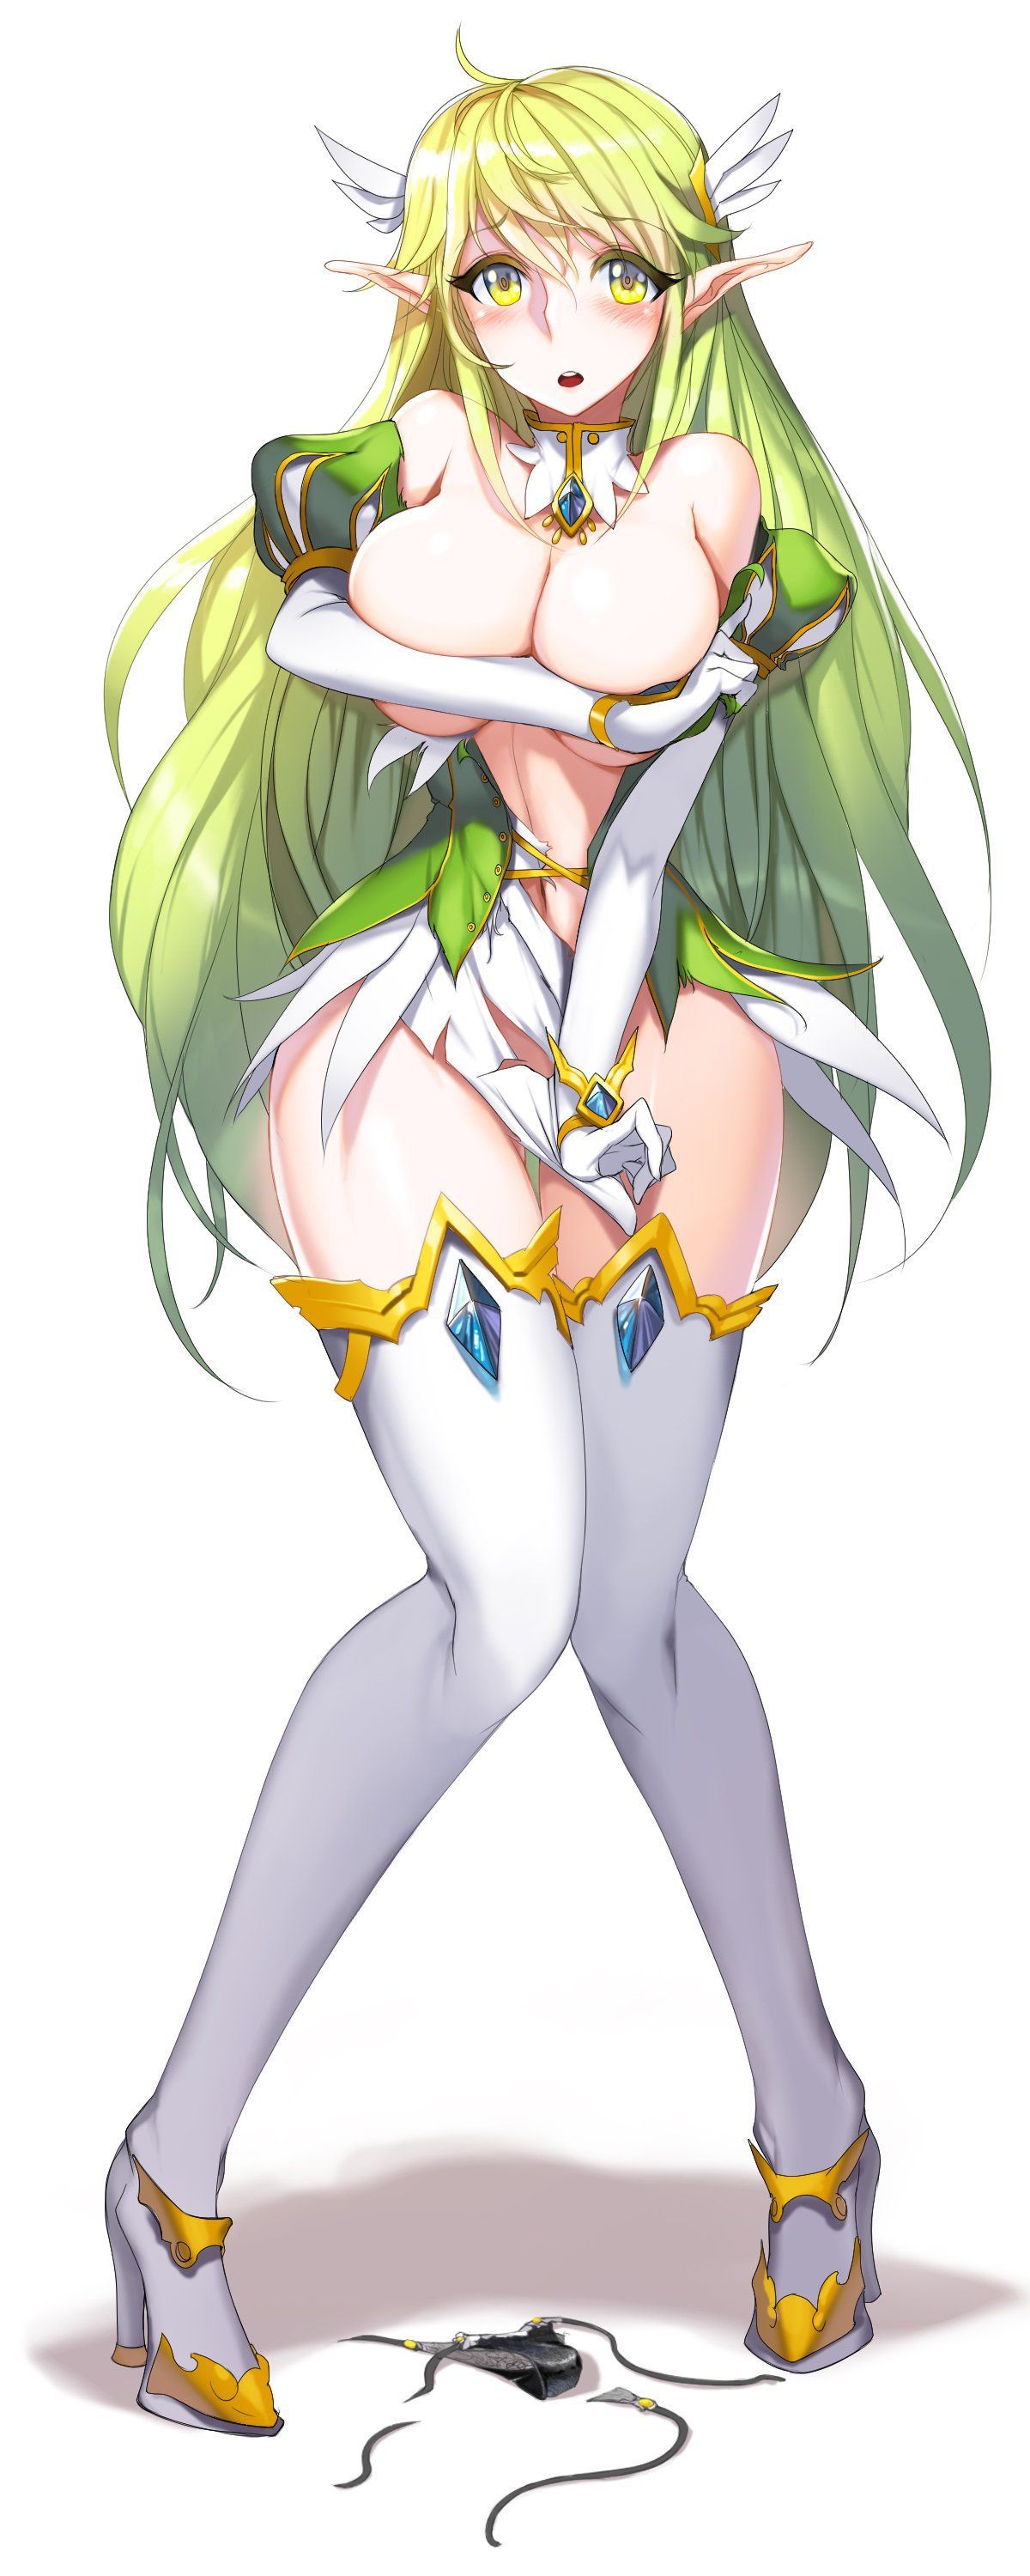 【Elves】Give me an image of an elf girl who is a cheat race with only beautiful men and women Part 10 12